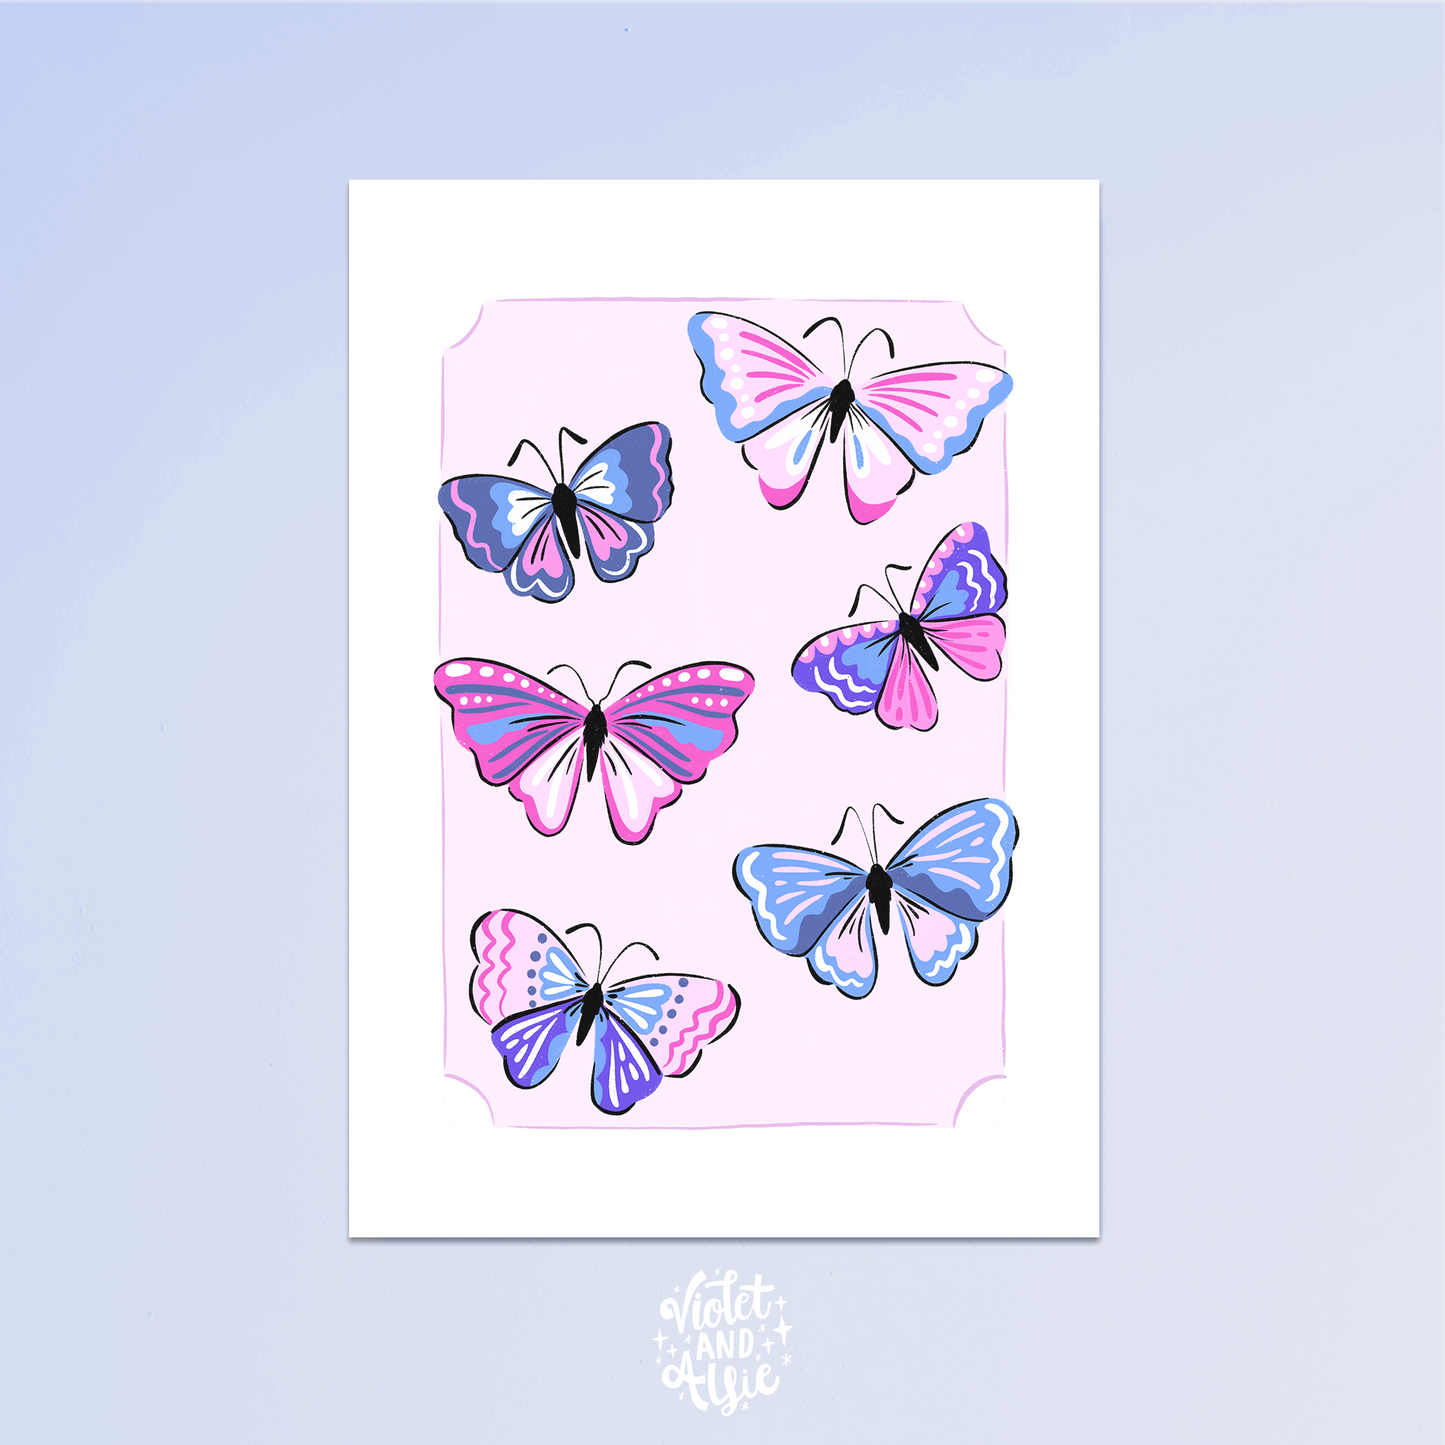 Colourful Butterfly illustration Print - Pretty Nature Themed Art